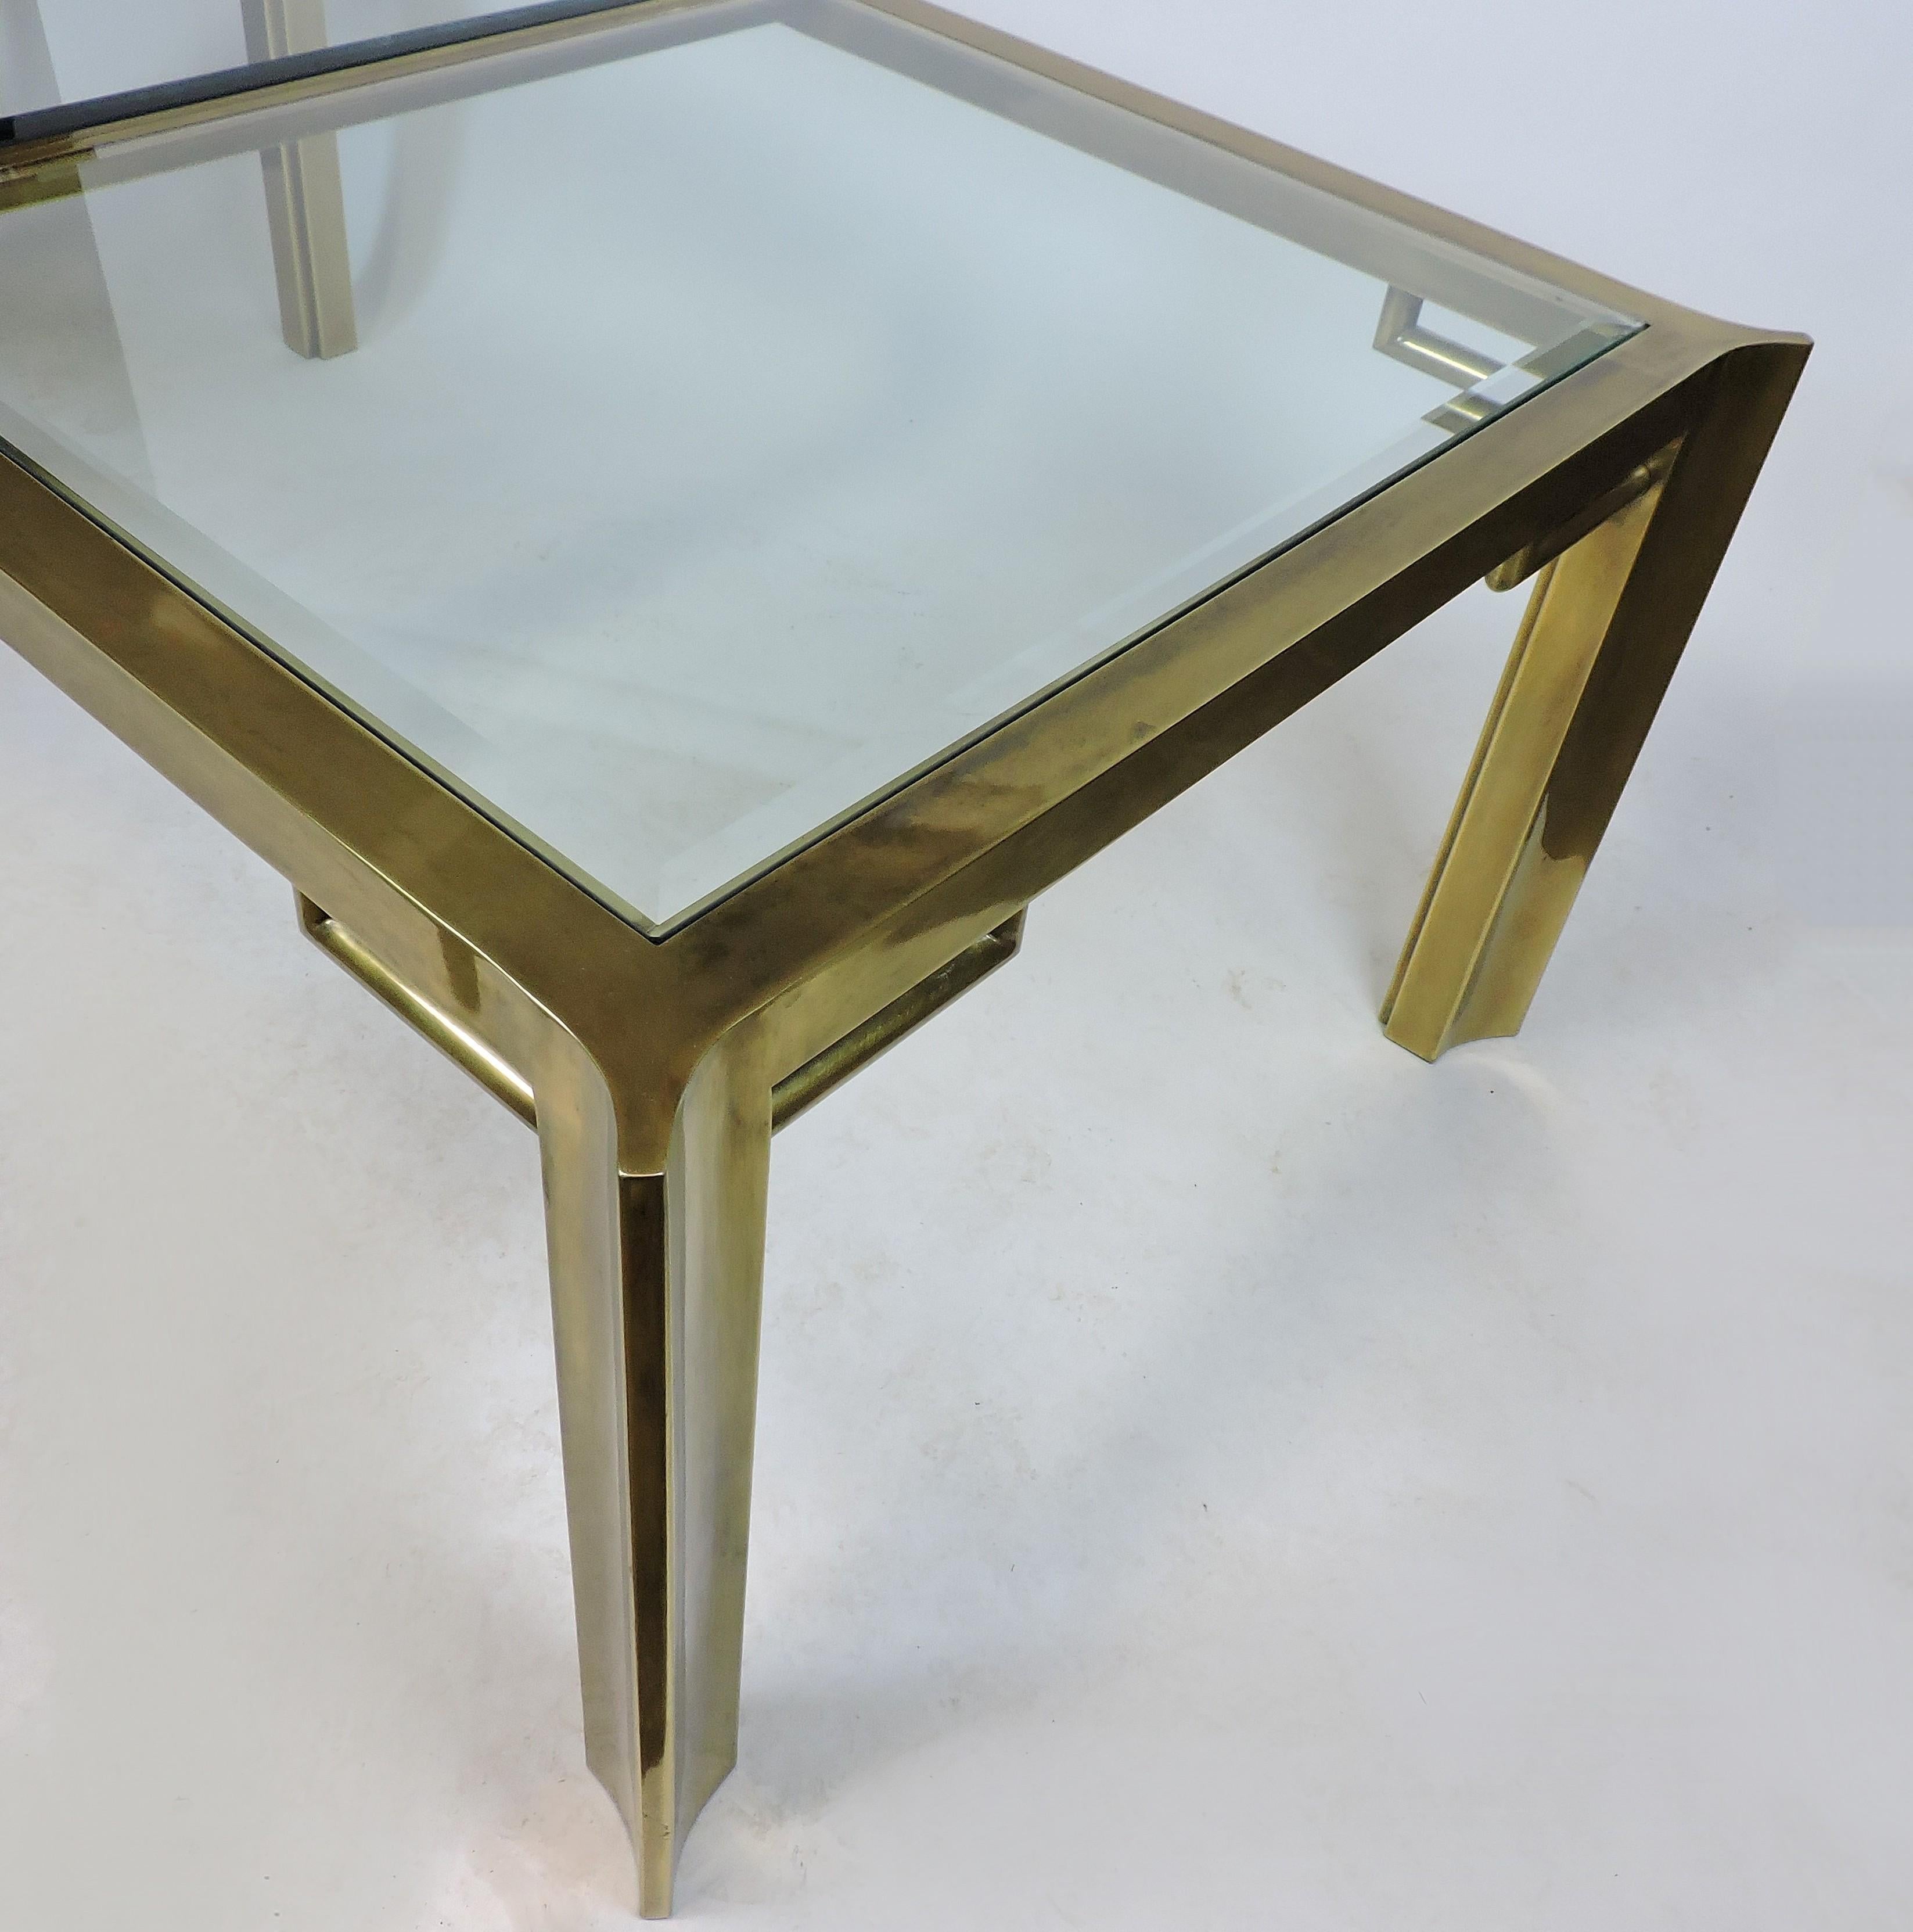 American Mastercraft Brass and Beveled Glass Extendable Dining Table by William Doezma